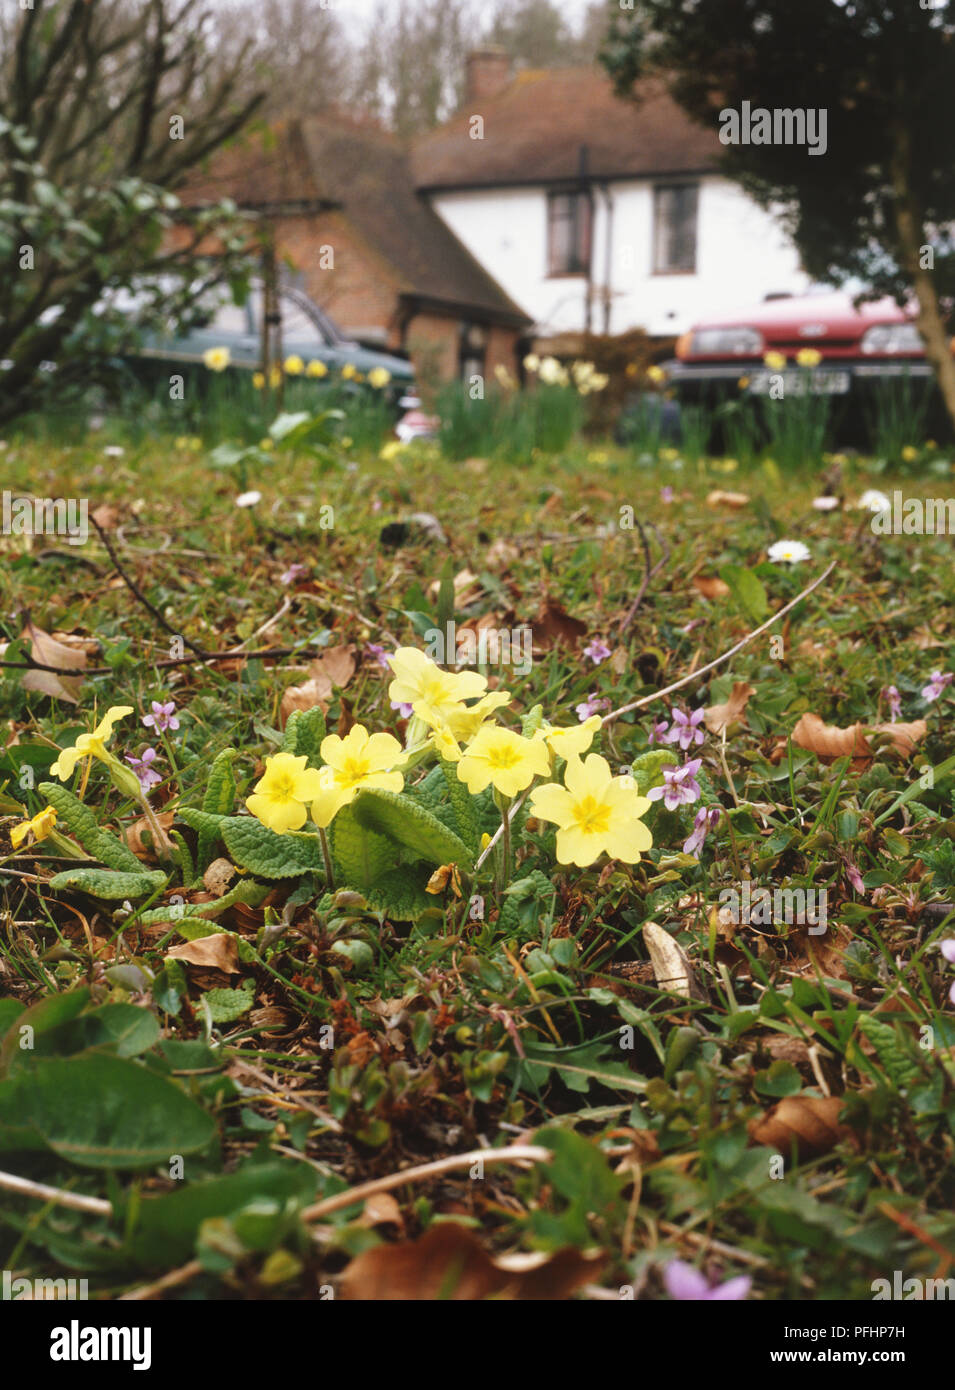 Primula and violets on a field near a house, parked cars Stock Photo